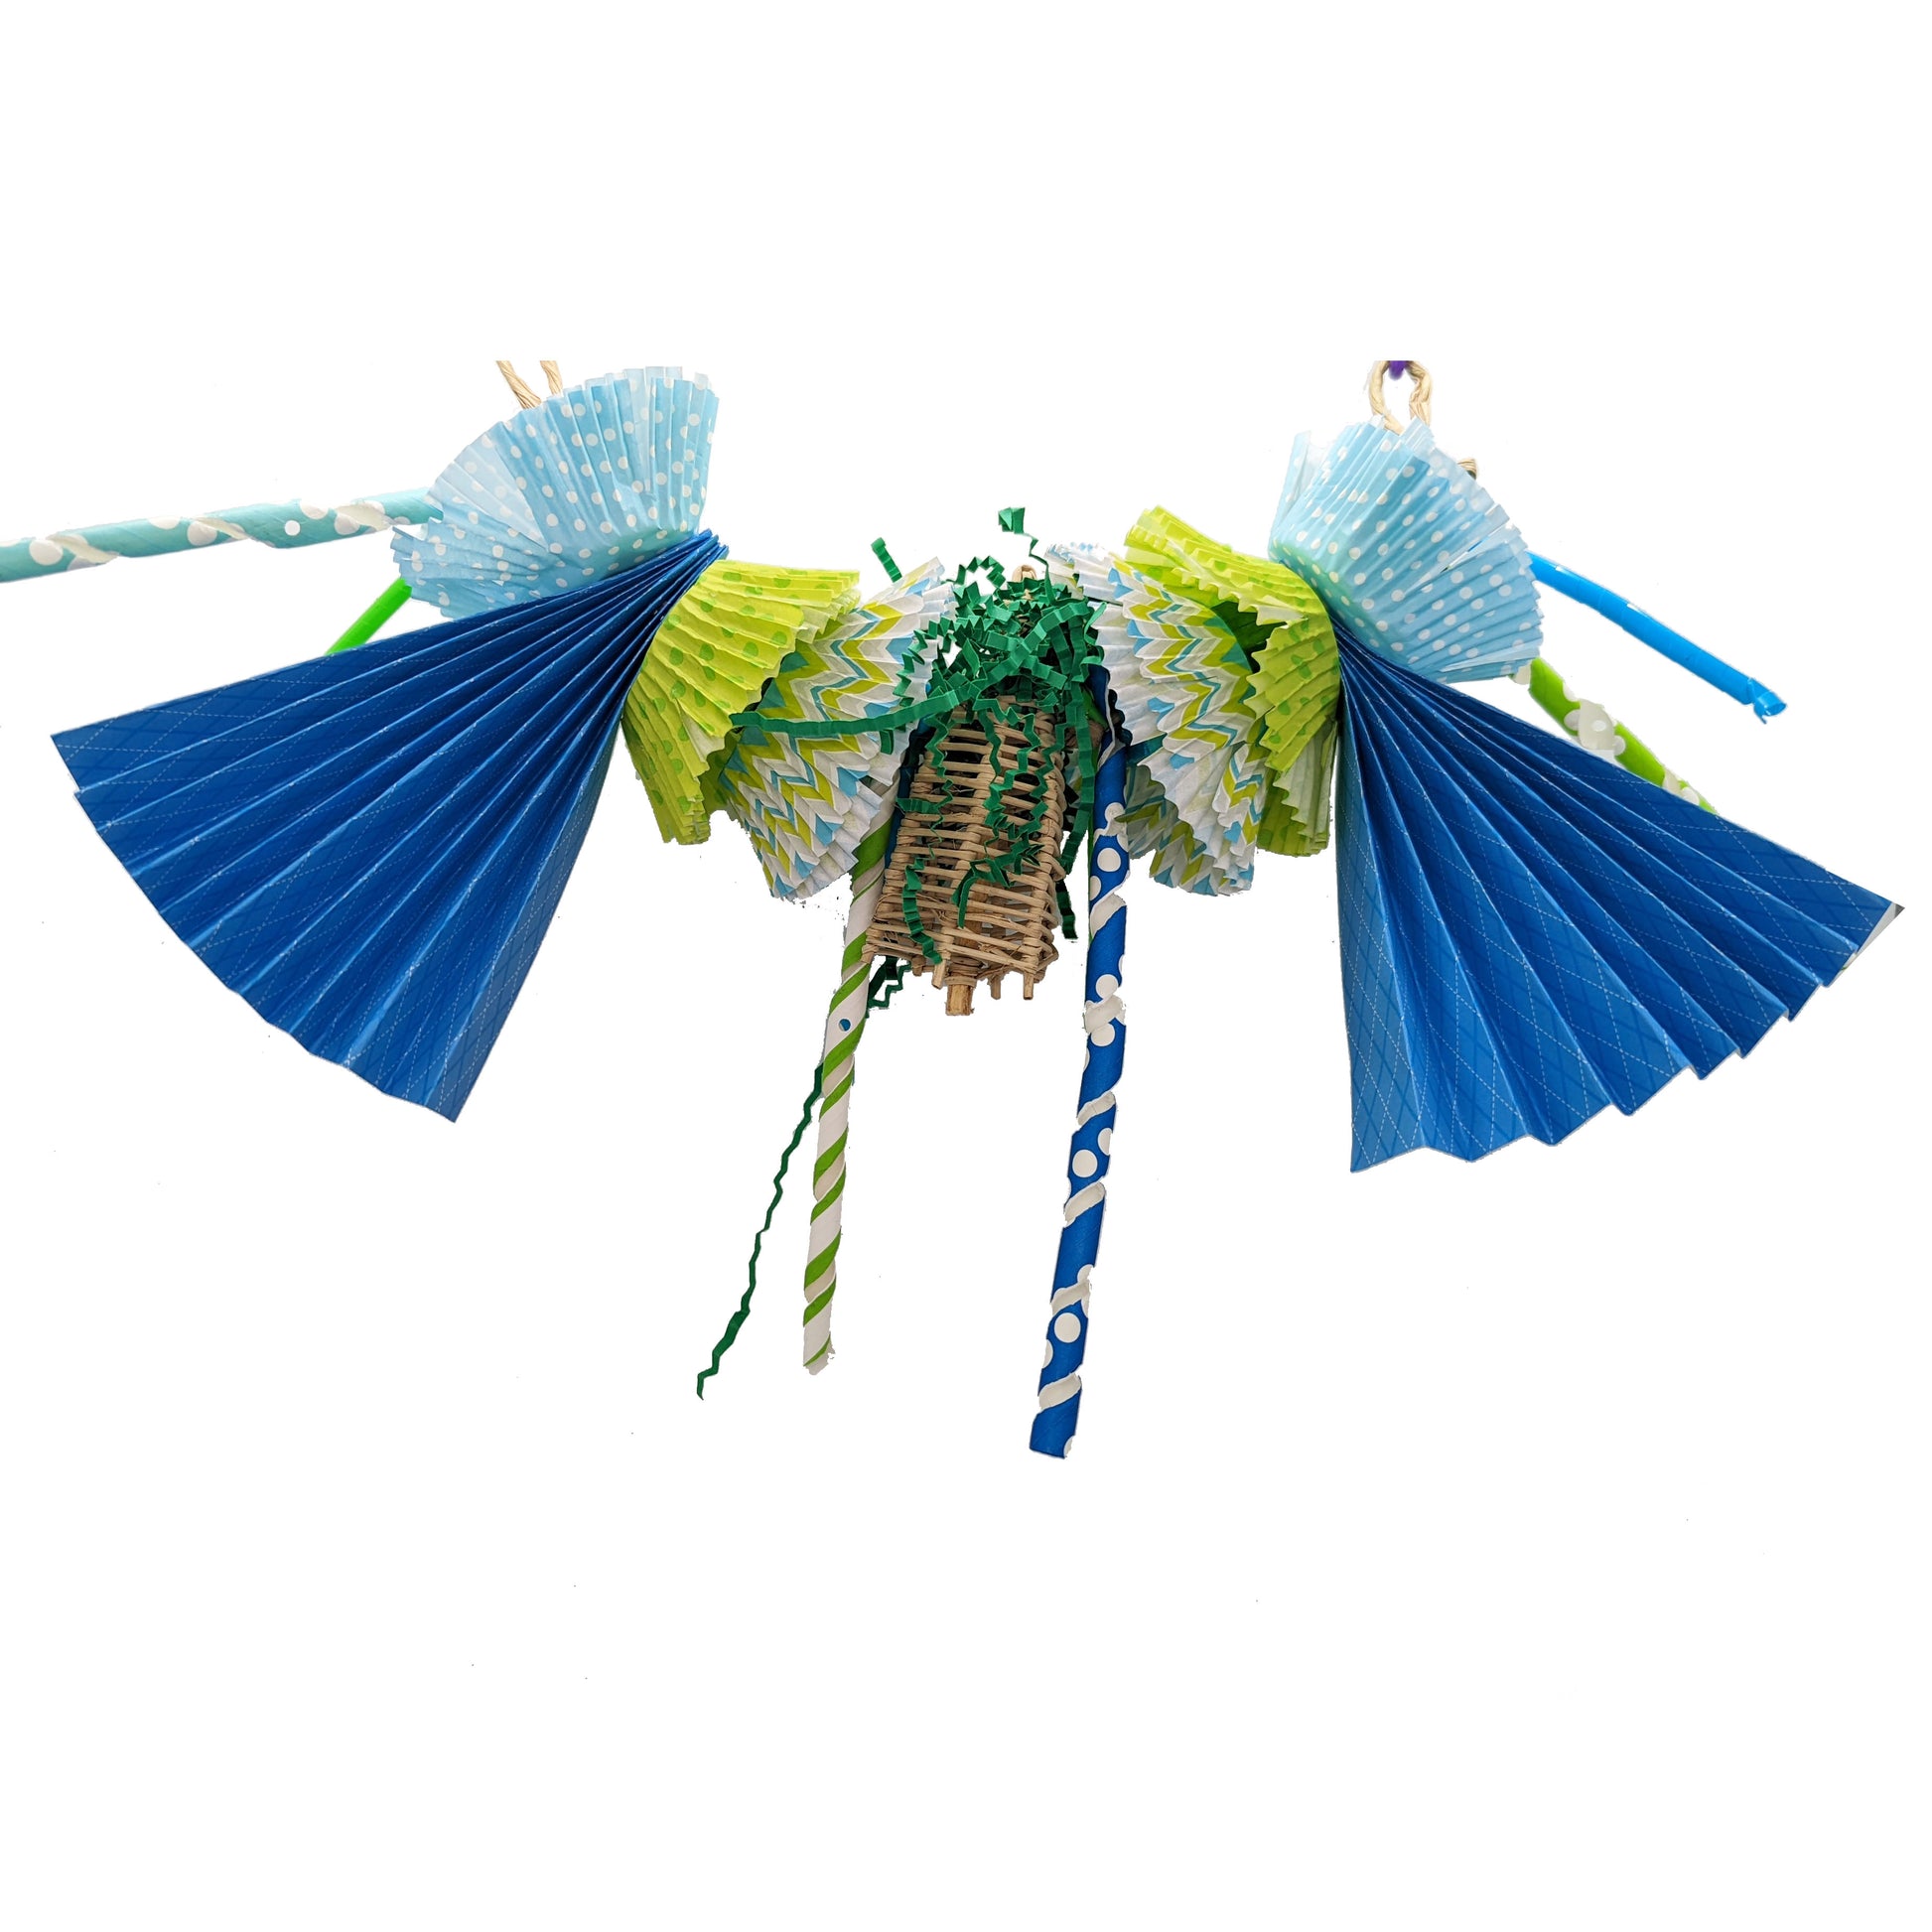  A garland style toy for parrots with cupcake liners, paper straws, and shredded paper, in blue and green colors with various patterns. Includes balsa blocks, a vine party hat, and strung on paper rope.  Blue and green coloration